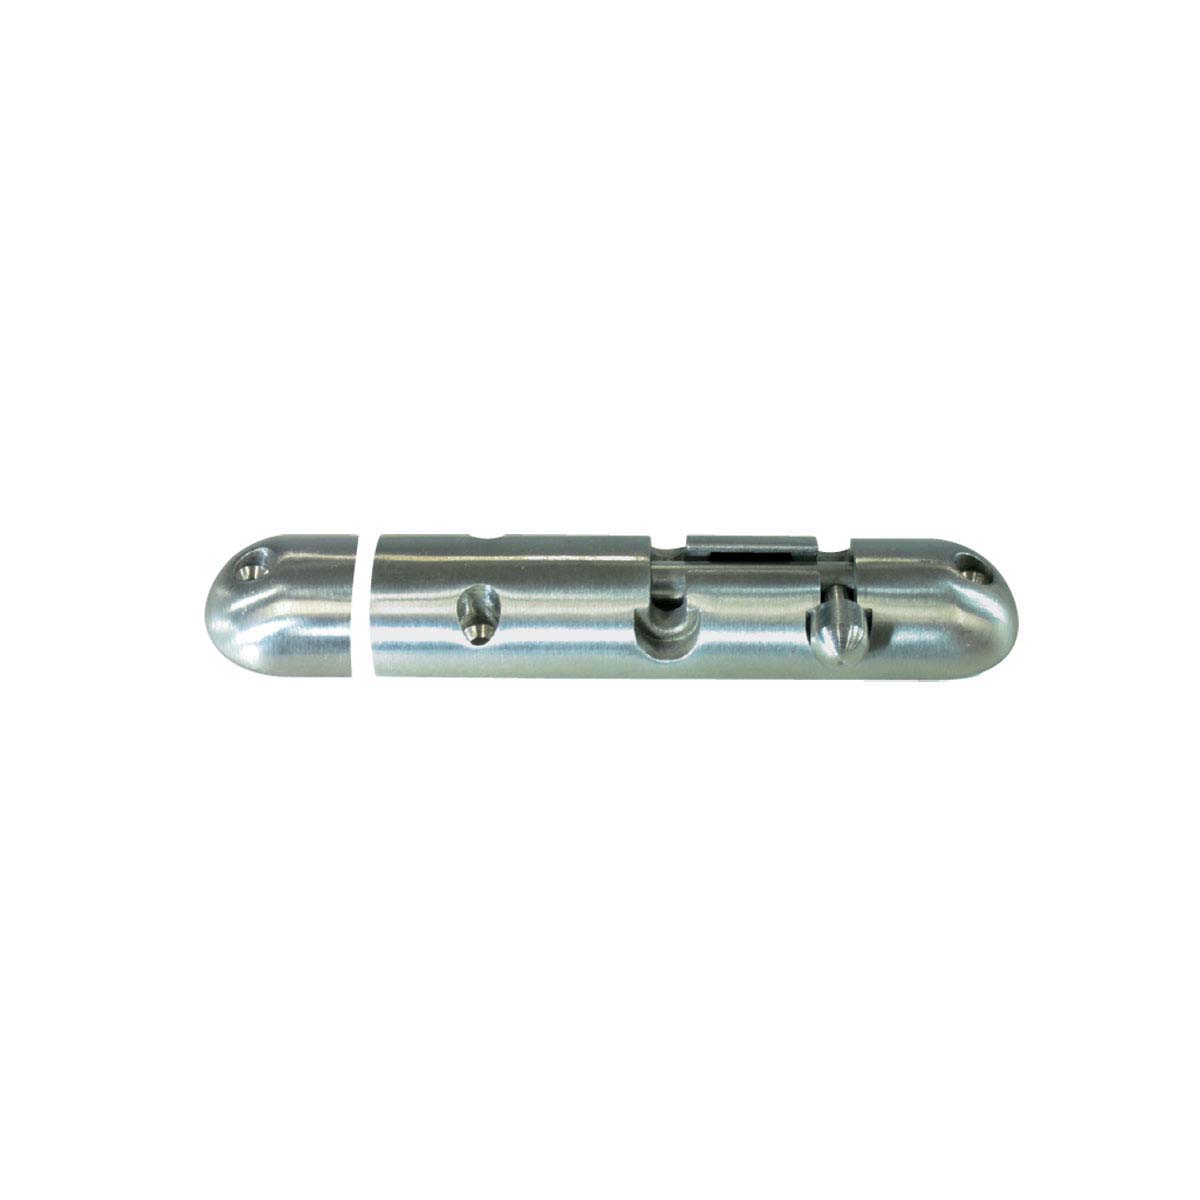 Barrel Bolt Rounded Non Catch 316 Stainless Steel